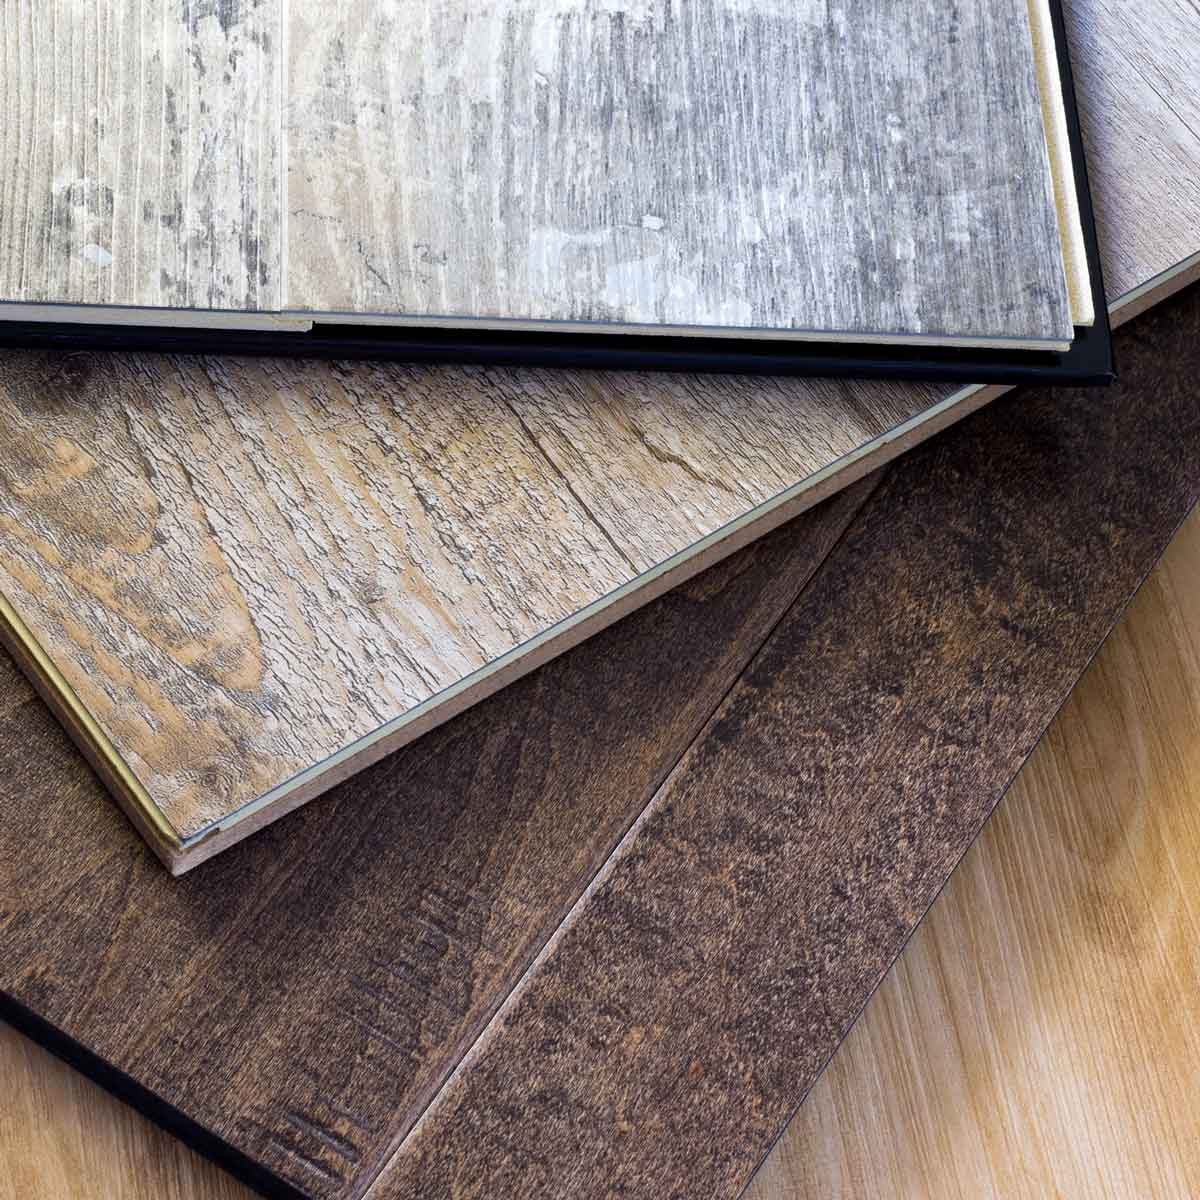 Buyer's Guide To Flooring Options